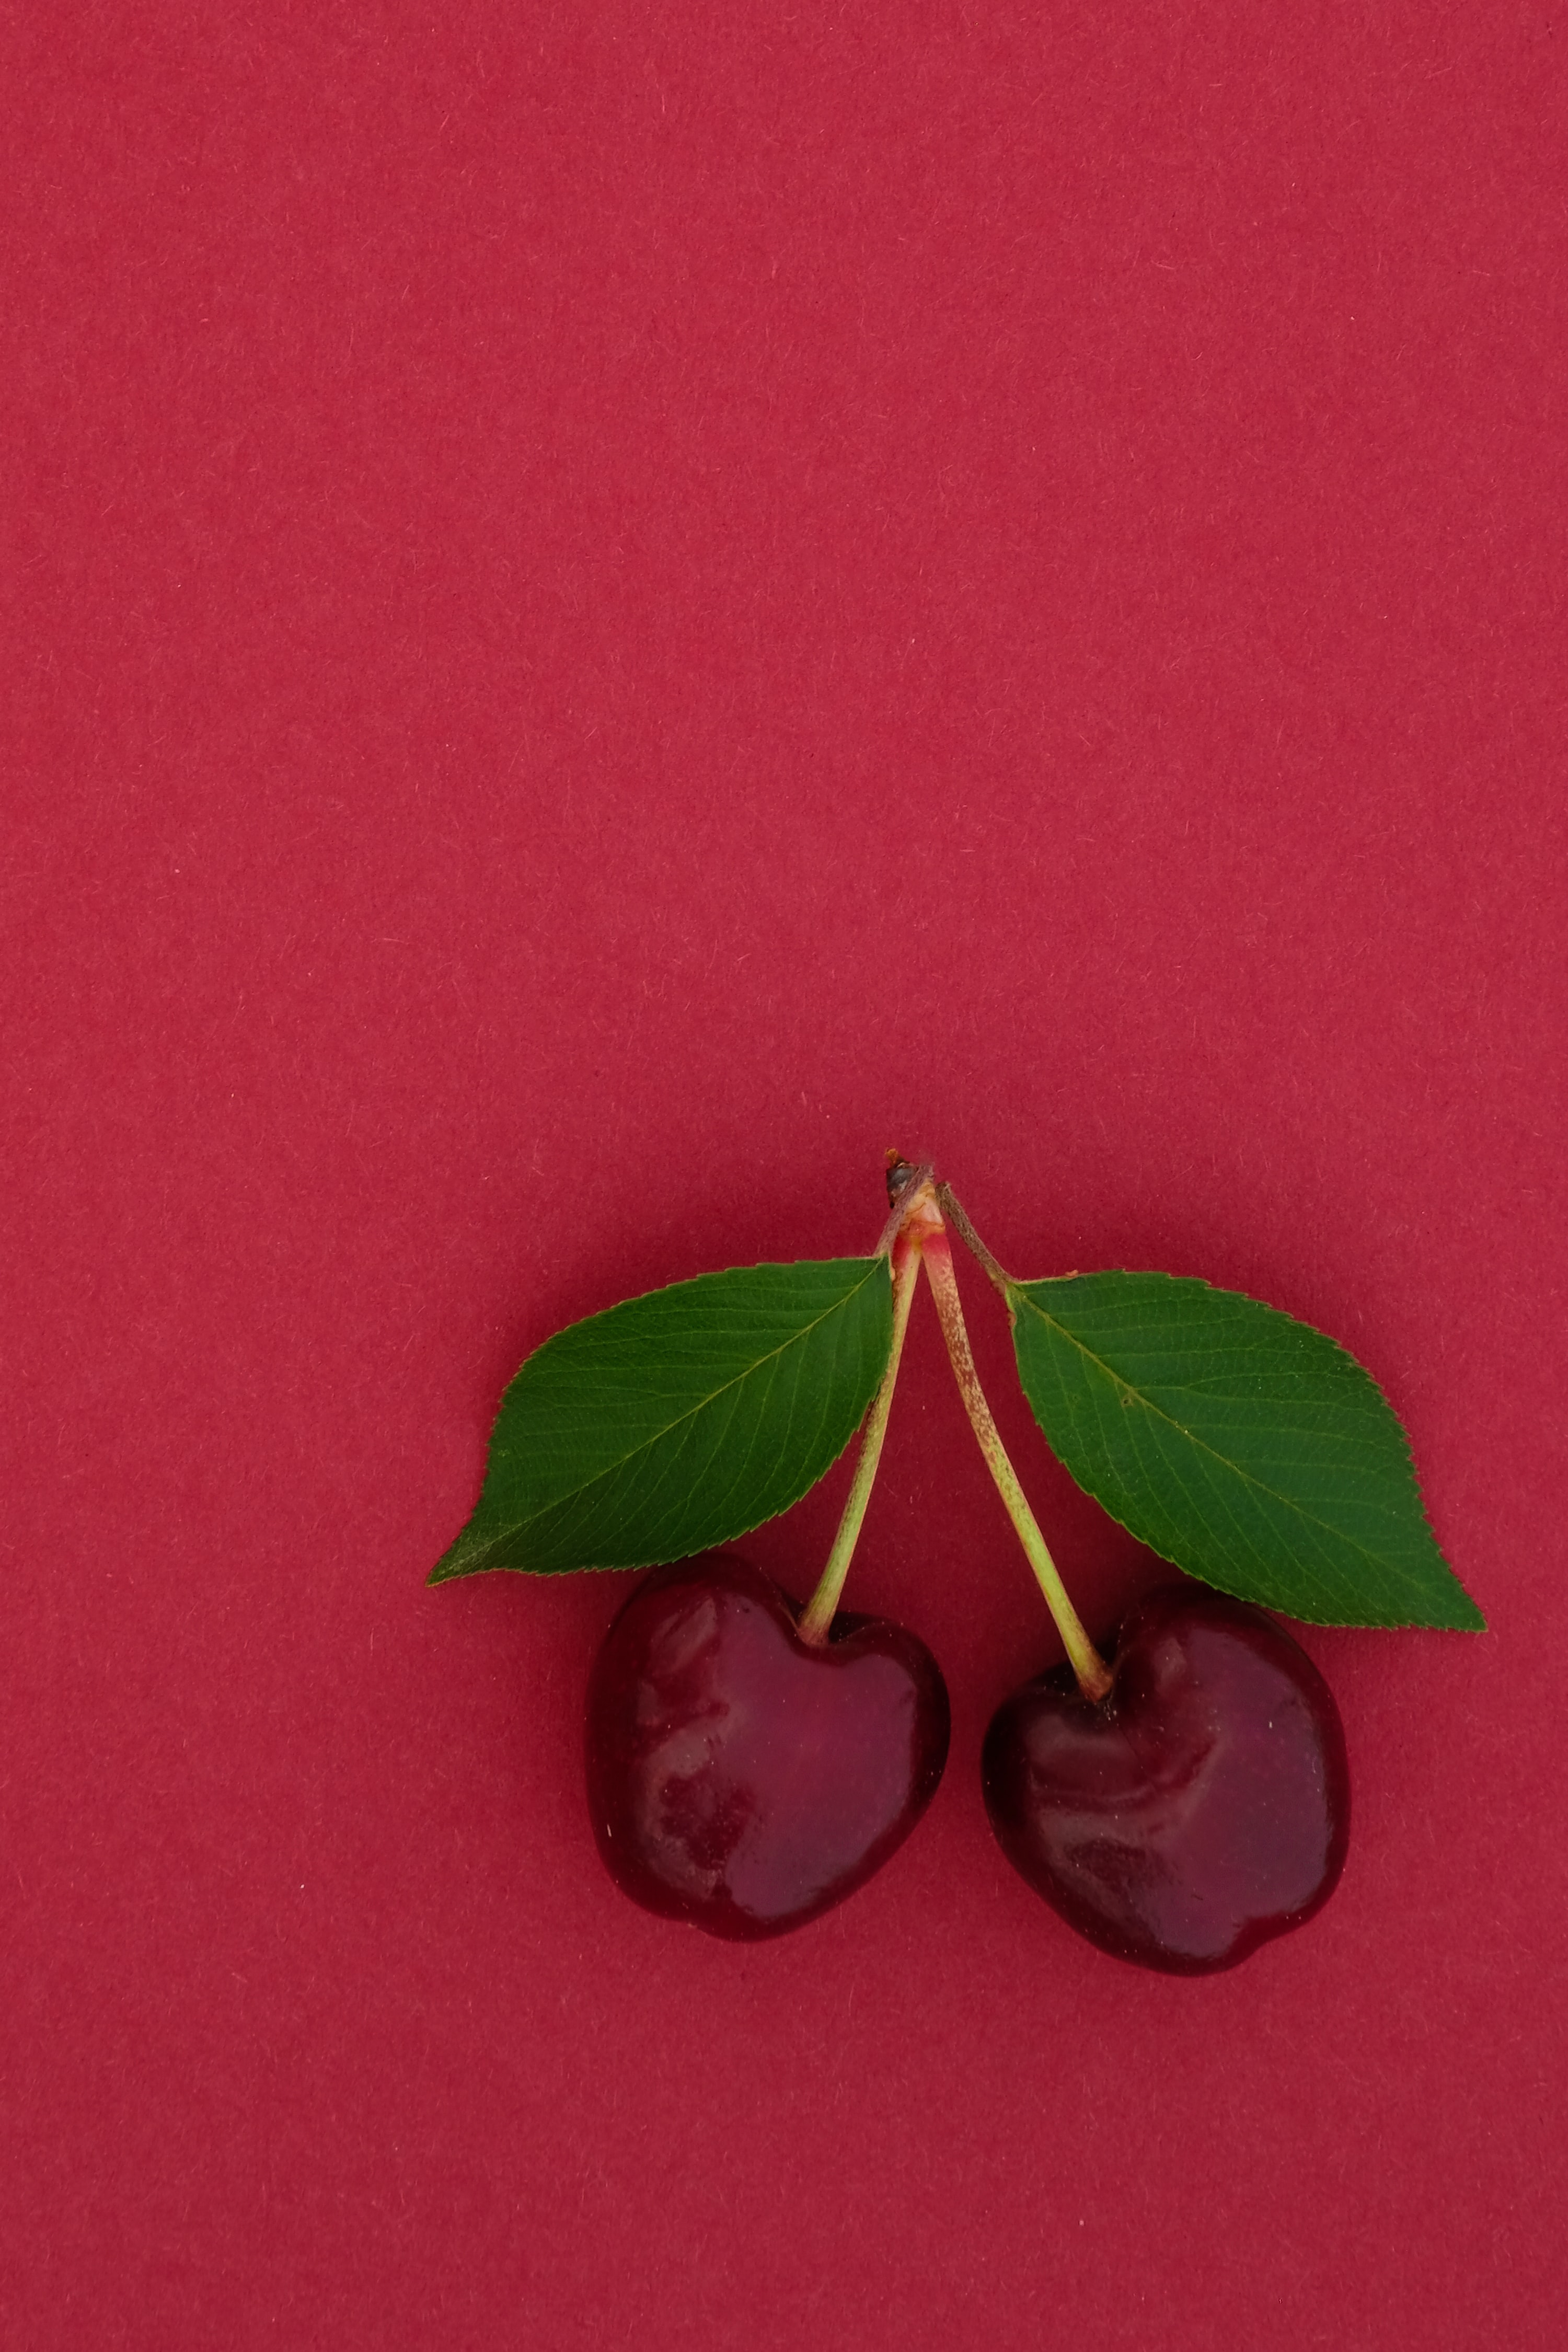 59351 download wallpaper sweet cherry, food, cherry, leaves, berry screensavers and pictures for free